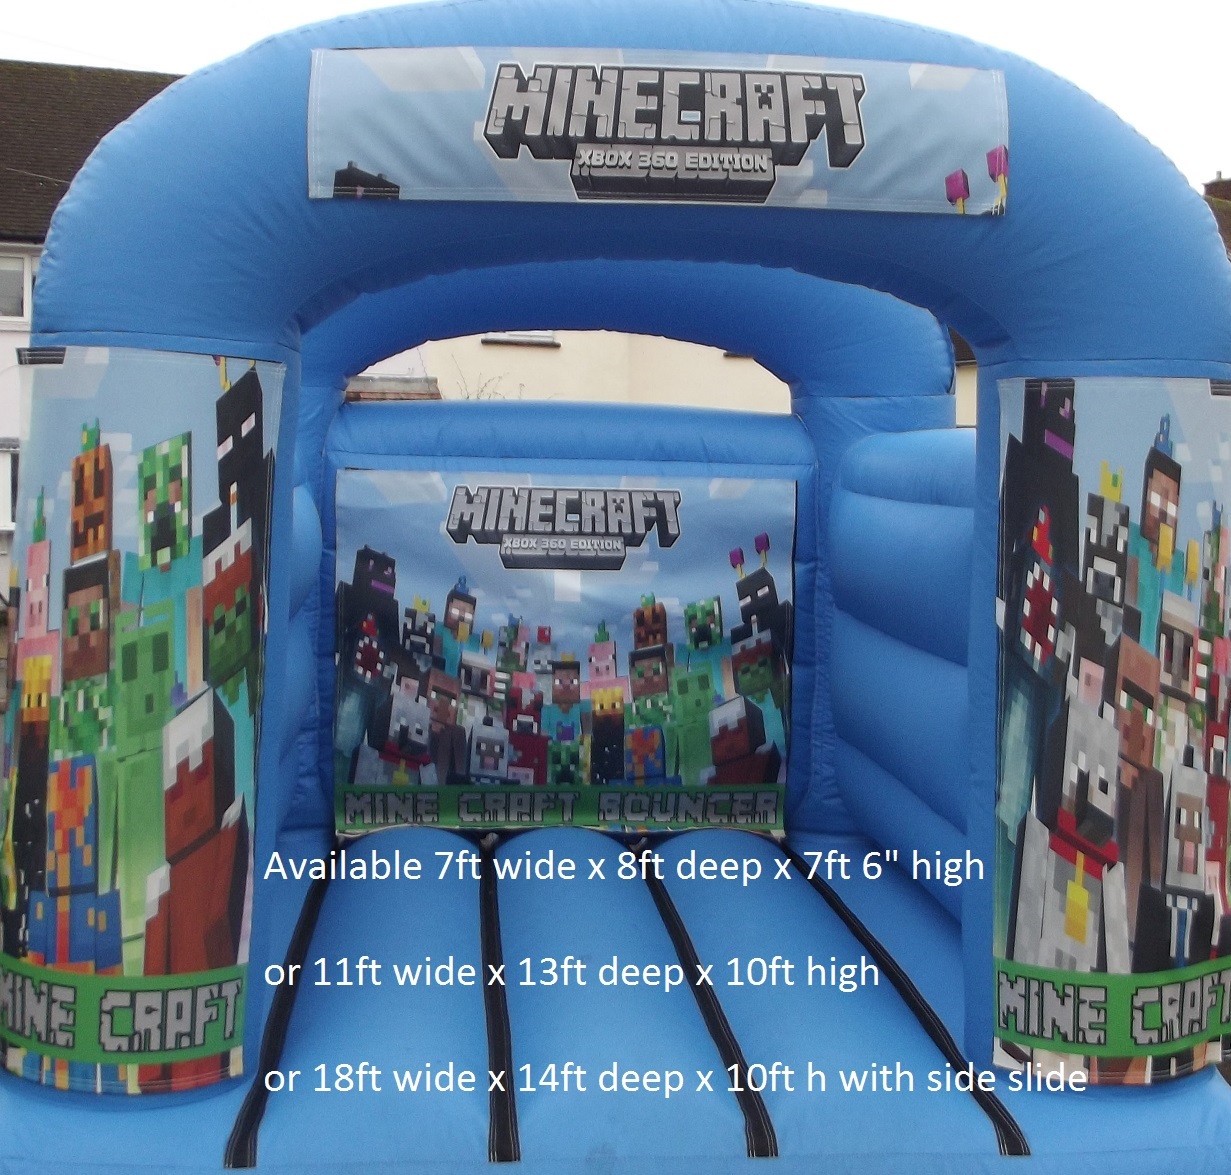 A Minecraft 7ftx8ftx7ft 6 Bouncy Castle Softplay And Mascot Hire In Dagenham Enfield Ilford Wanstead Chingford Romford Chadwell Heath London